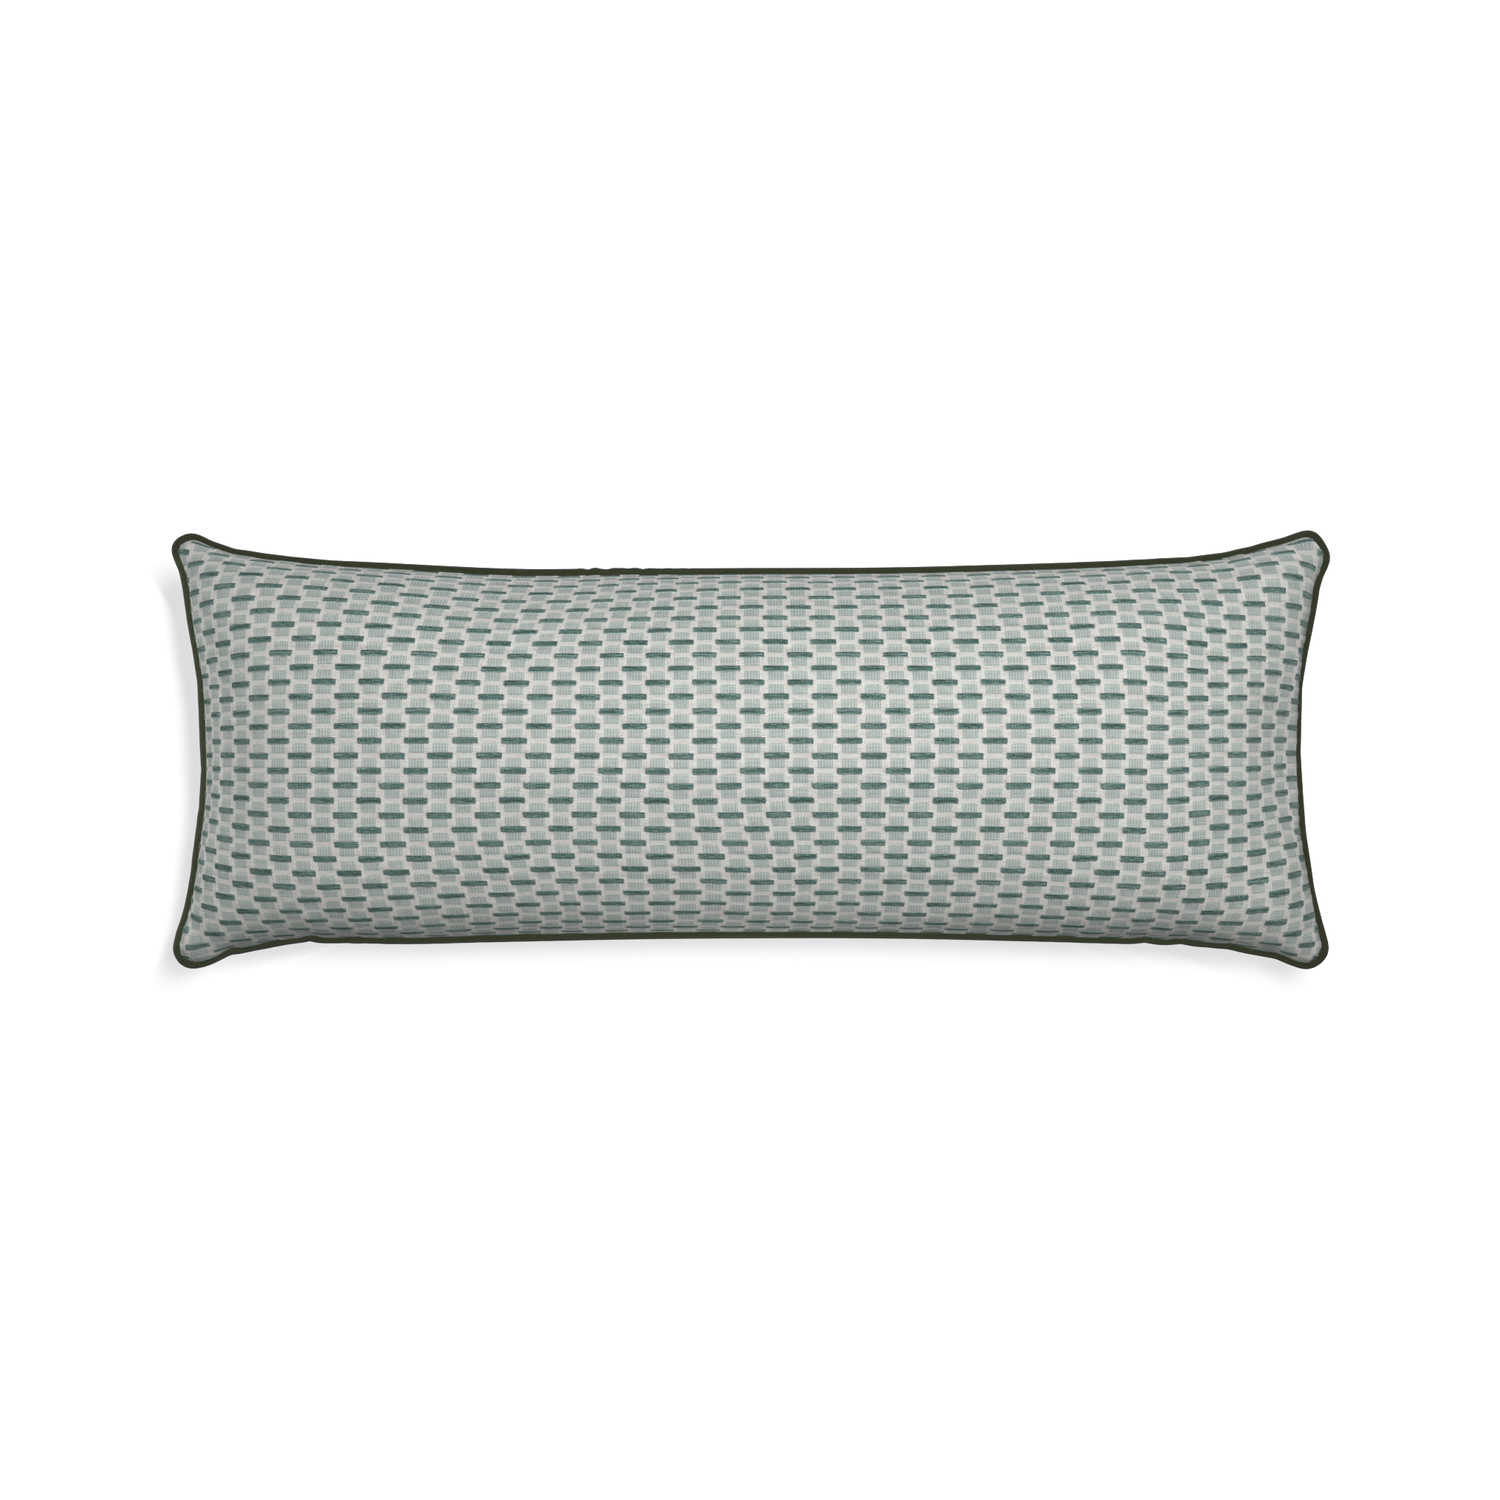 Xl-lumbar willow mint custom green geometric chenillepillow with f piping on white background